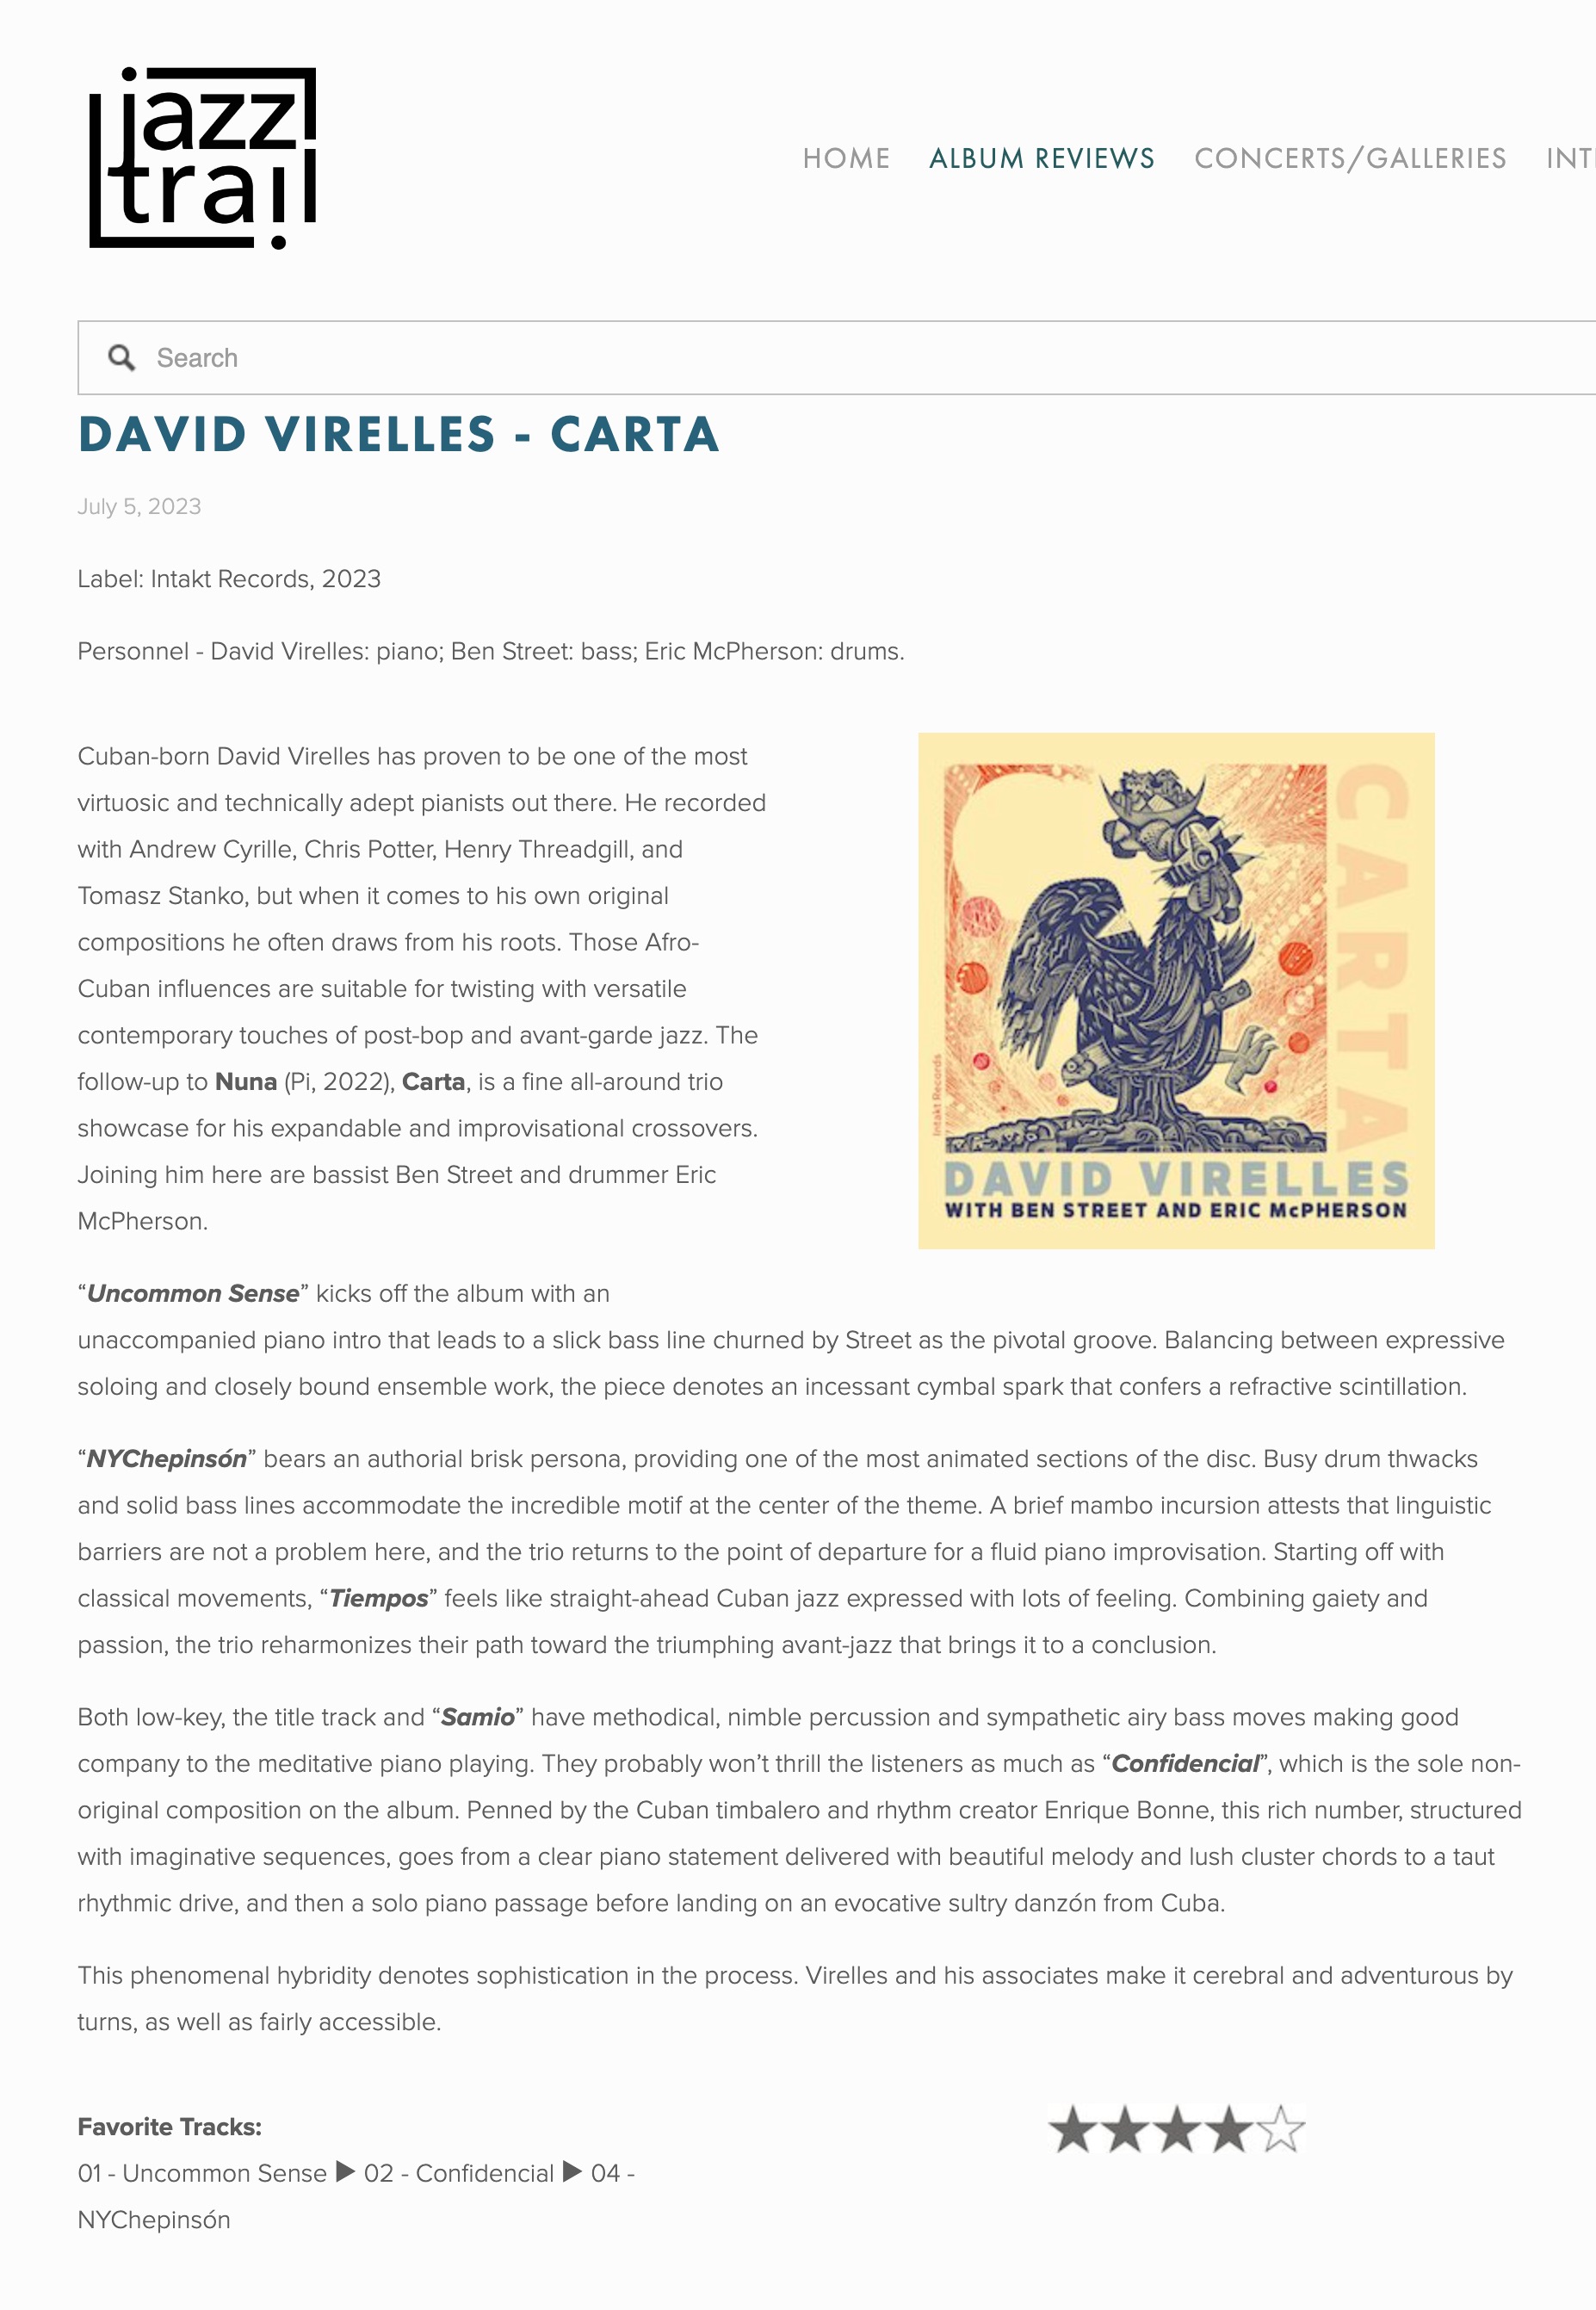 Cuban-born David Virelles has proven to be one of the most virtuosic and technically adept pianists out there. He recorded with Andrew Cyrille, Chris Potter, Henry Threadgill, and Tomasz Stanko, but when it comes to his own original compositions he often draws from his roots. Those Afro-Cuban influences are suitable for twisting with versatile contemporary touches of post-bop and avant-garde jazz. The follow-up to Nuna (Pi, 2022), Carta, is a fine all-around trio showcase for his expandable and improvisational crossovers. Joining him here are bassist Ben Street and drummer Eric McPherson.